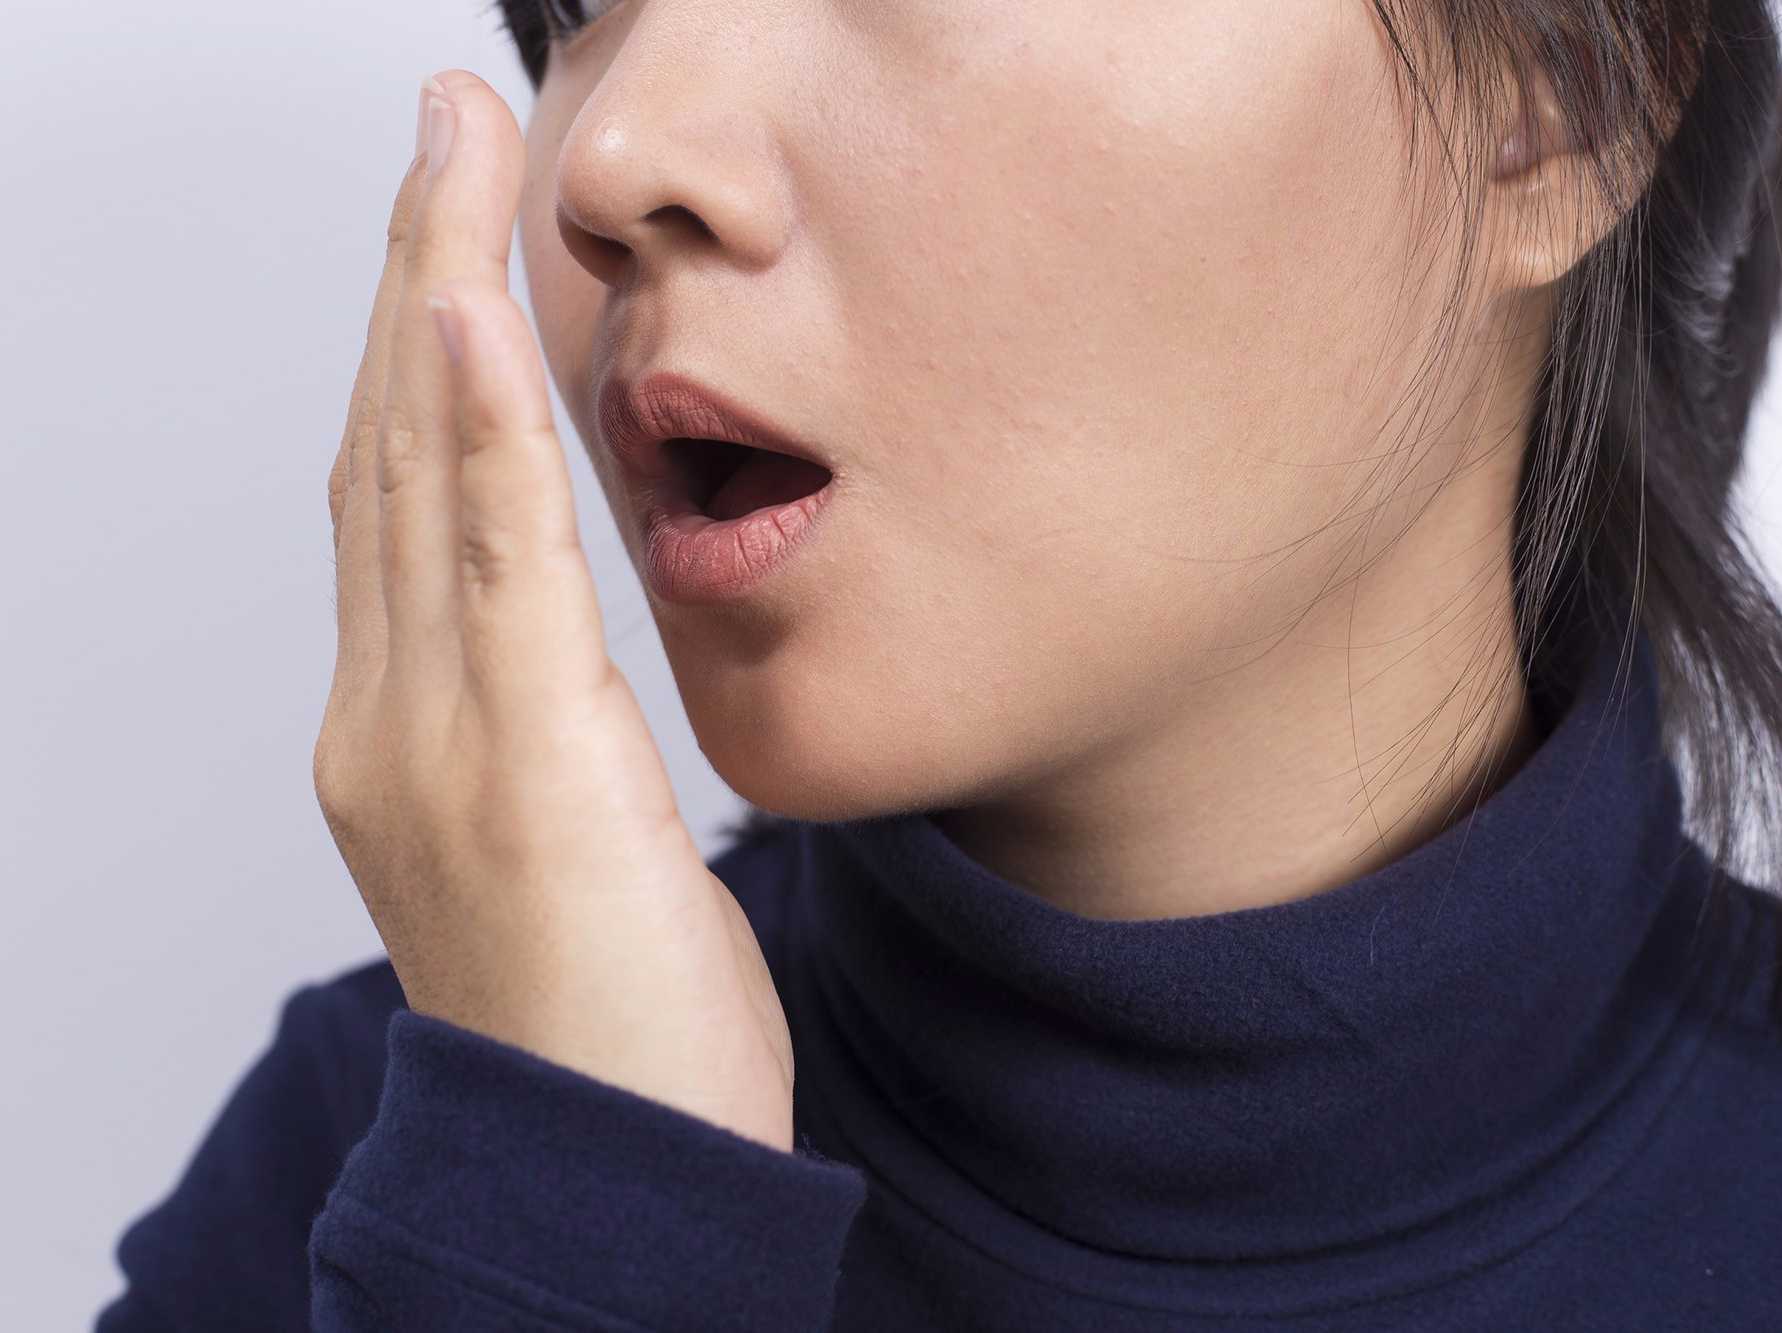 A Simple Nighttime Habit That Can Prevent Bad Morning Breath